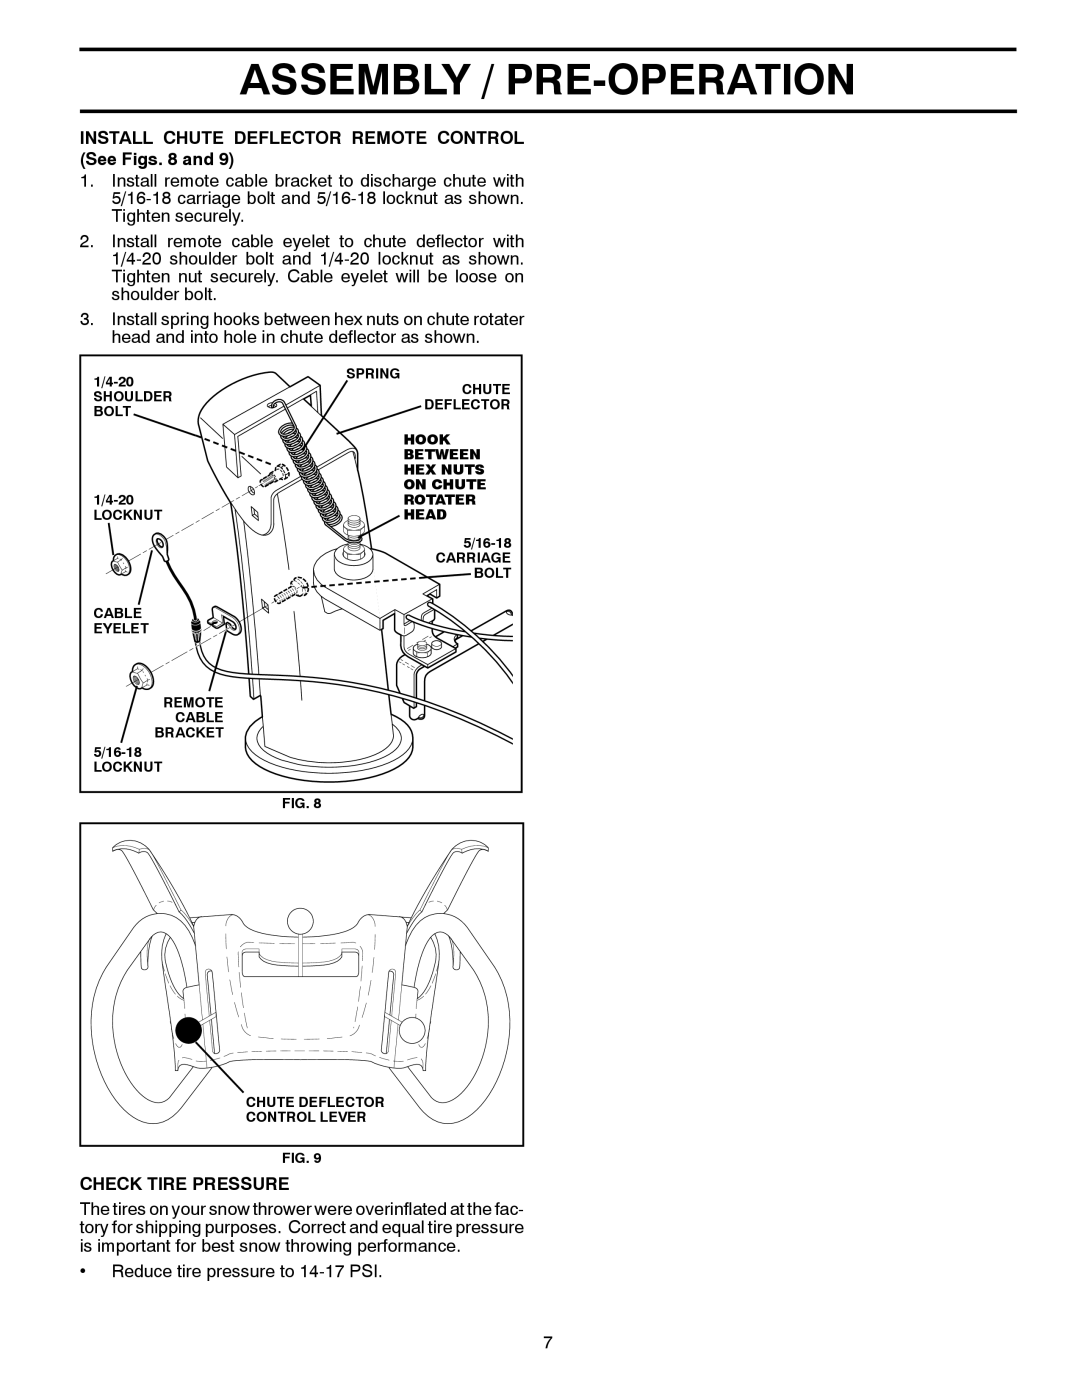 Poulan 96198002800 Assembly / Pre-Operation, INSTALL CHUTE DEFLECTOR REMOTE CONTROL See Figs. 8 and, Check Tire Pressure 